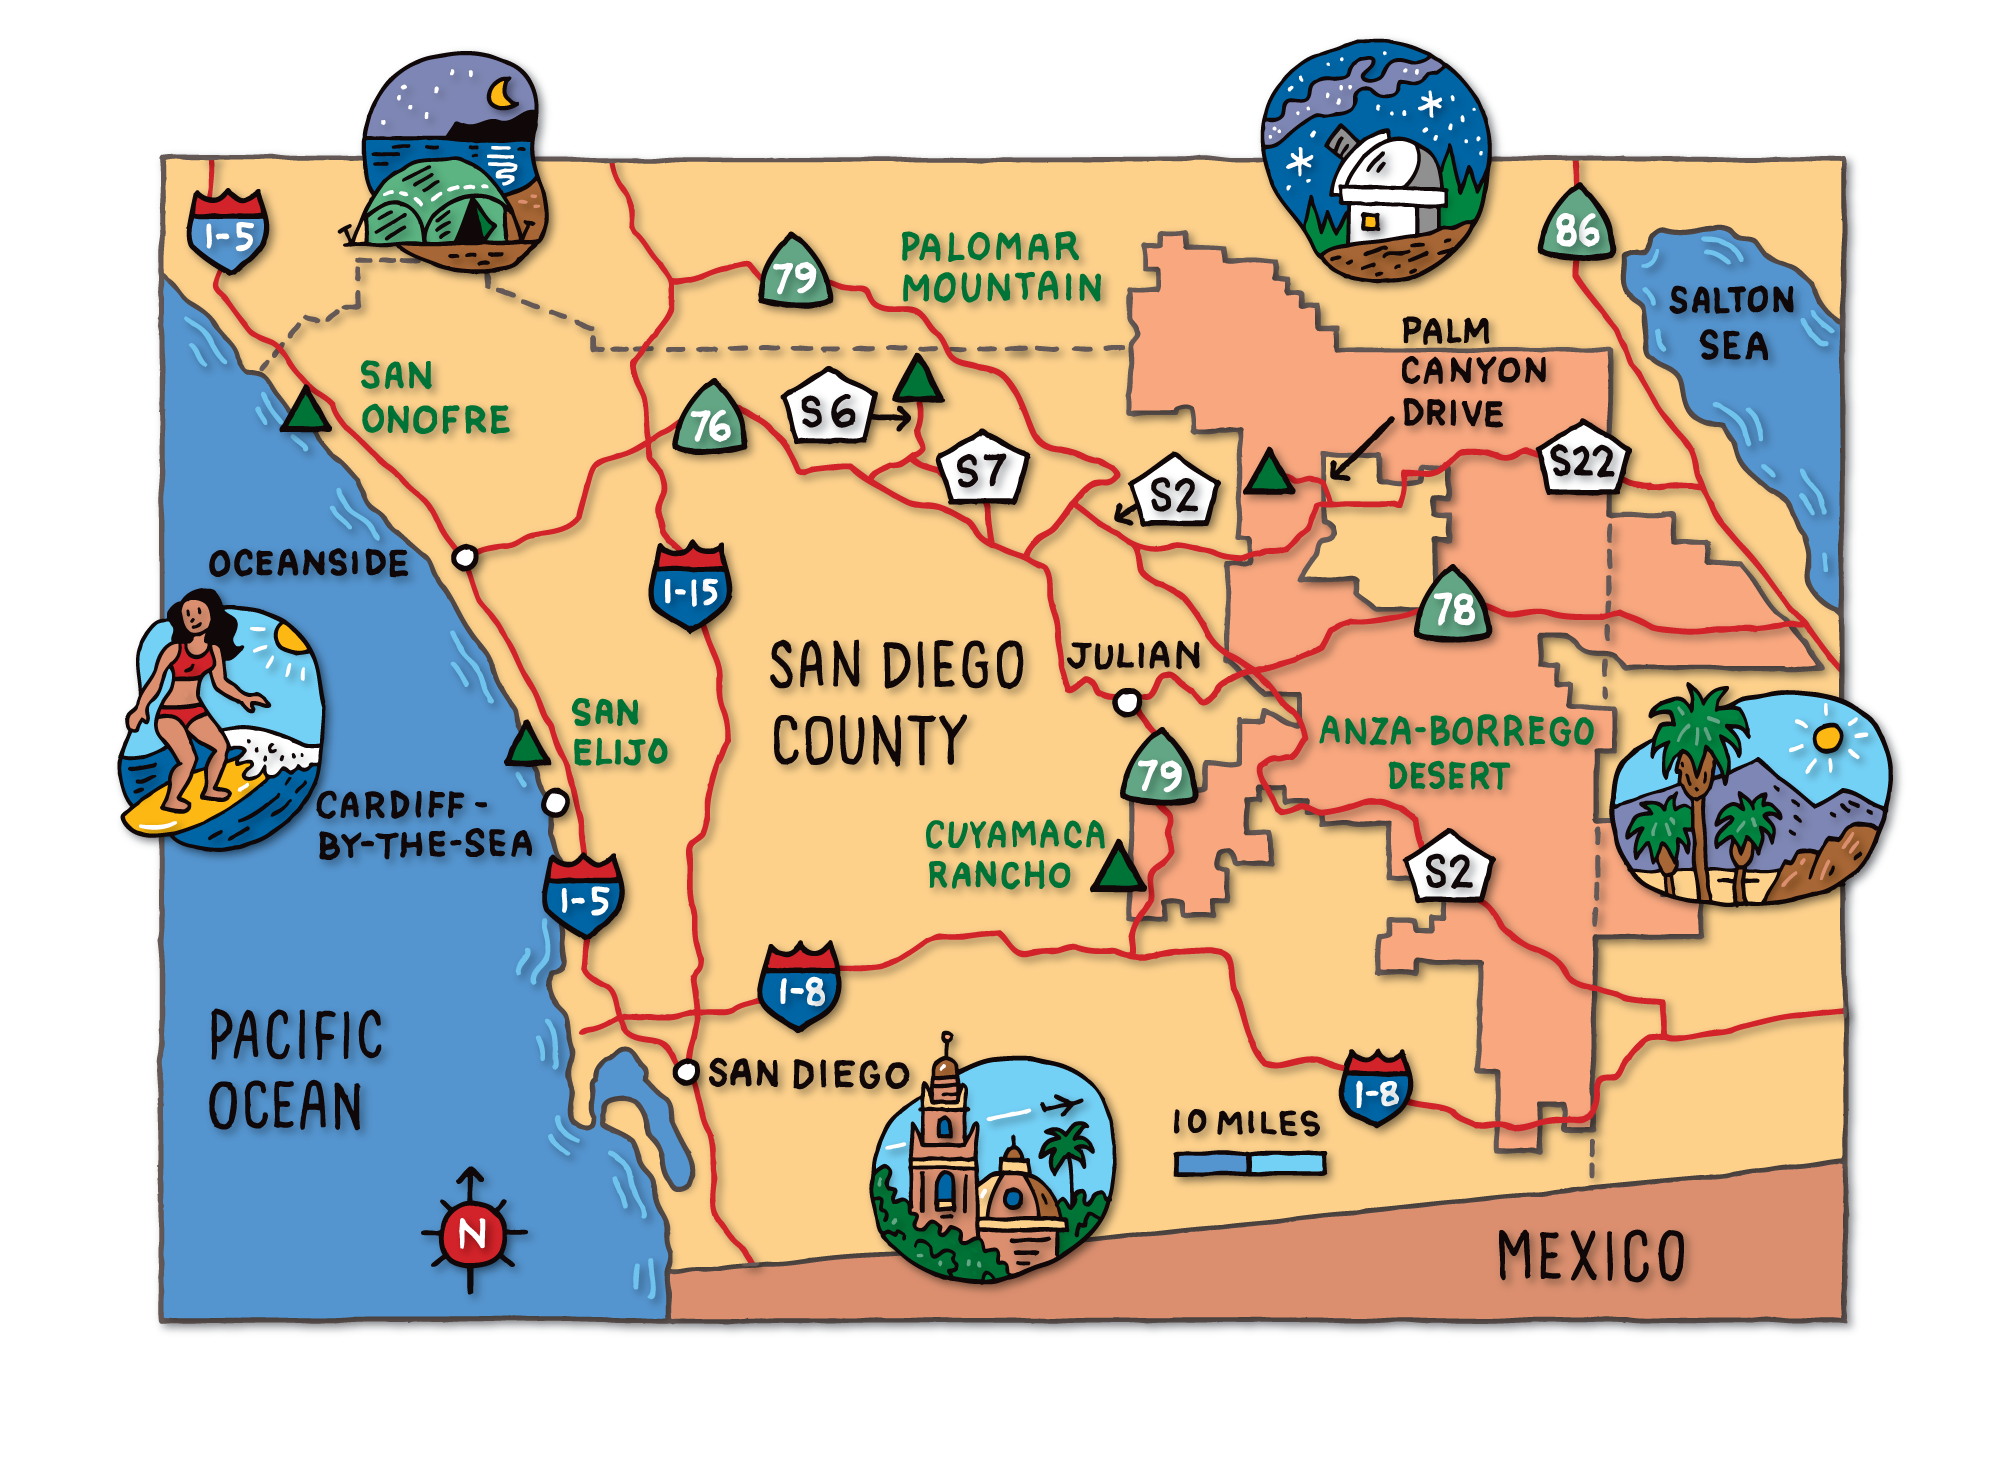 Southern California Map for Sunset Magazine